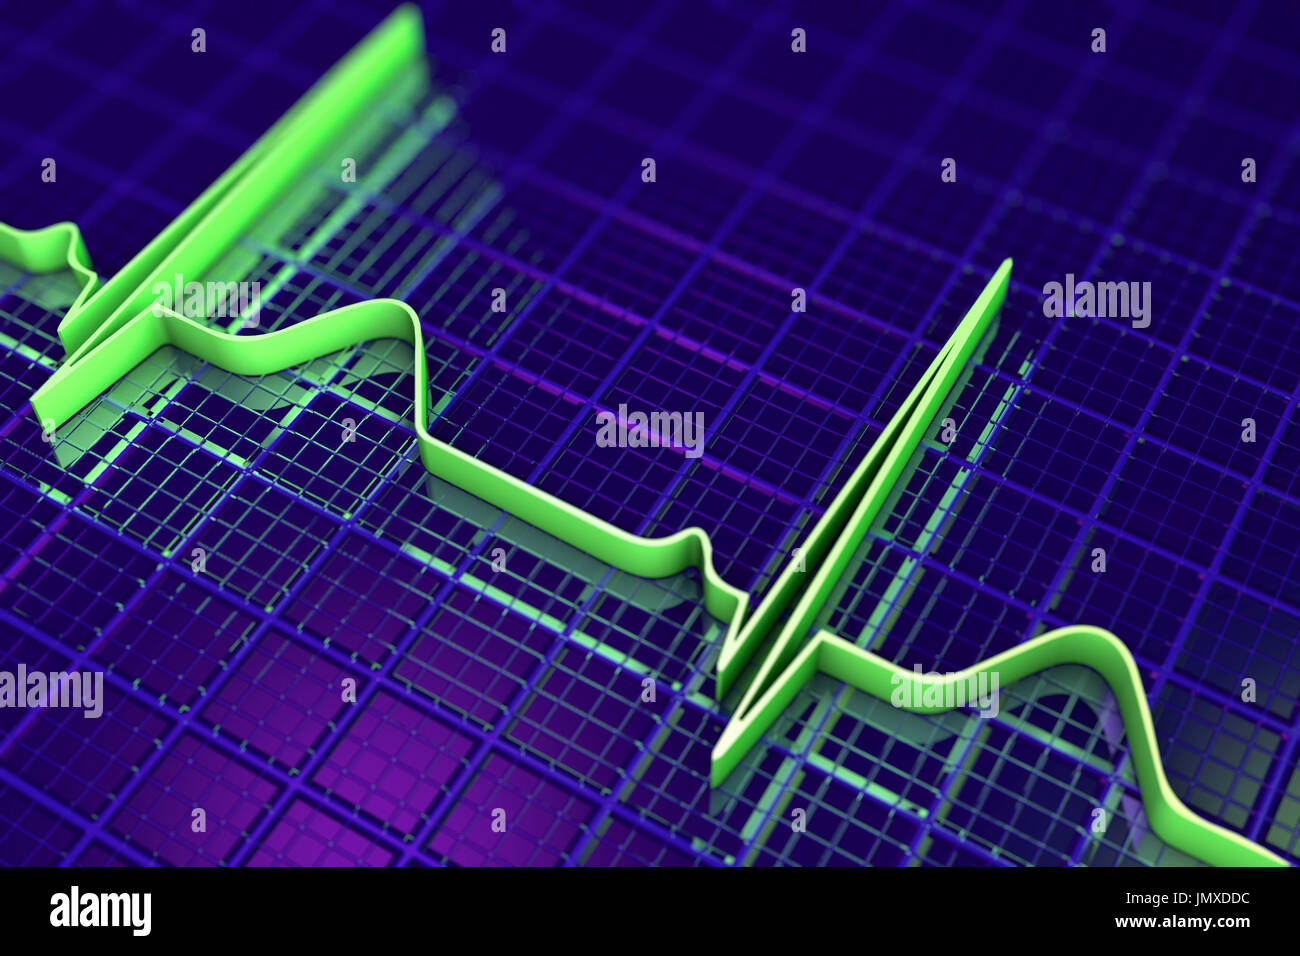 ECG. Computer illustration of an electrocardiogram (ECG) showing a normal heart rate. Stock Photo